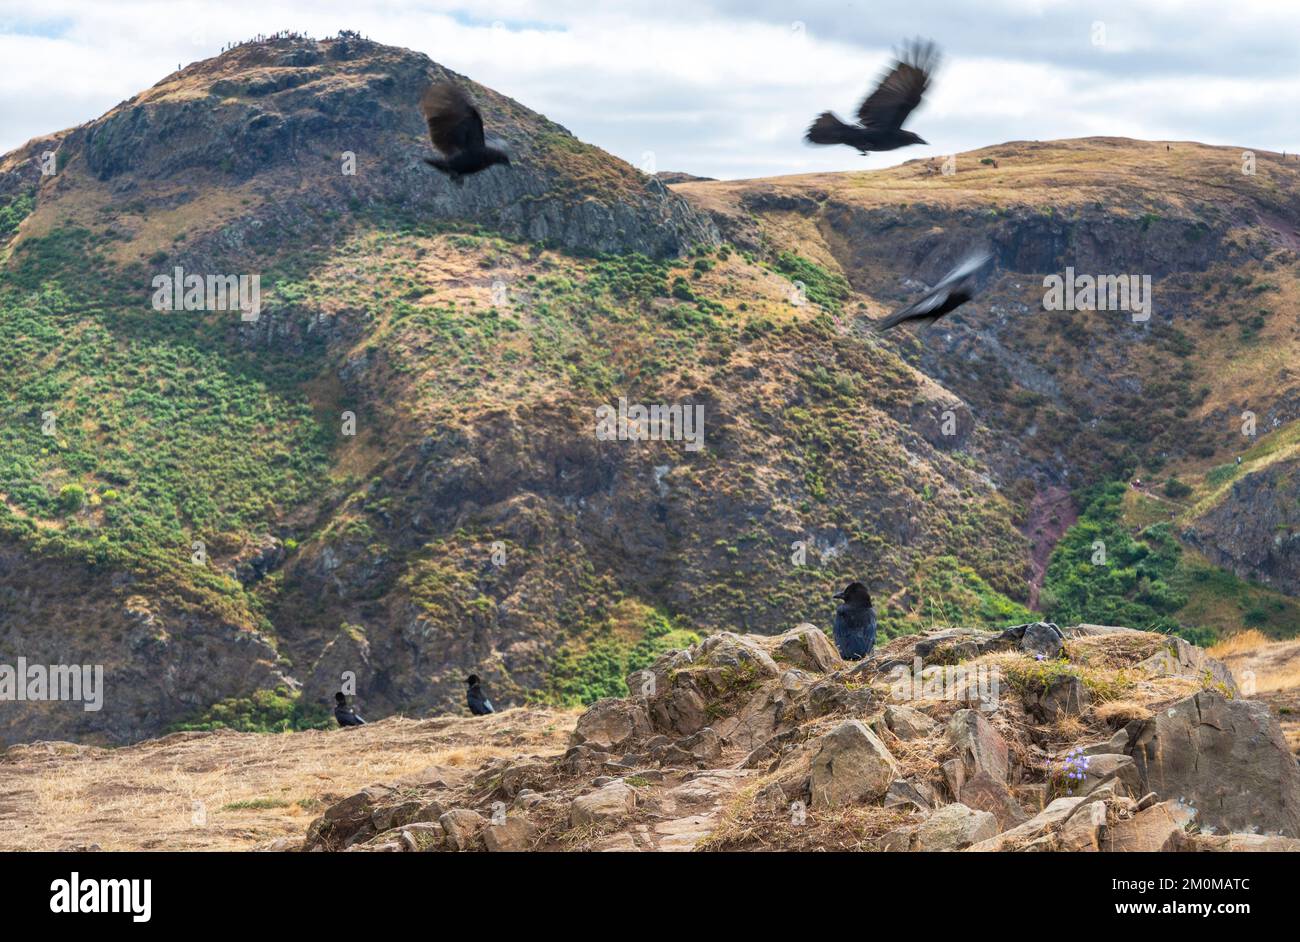 Black carrion birds,which the hill named after,circling and perched on the rocky mountain,,overlooking the Edinburgh city skyline,Arthurs Seat summit Stock Photo